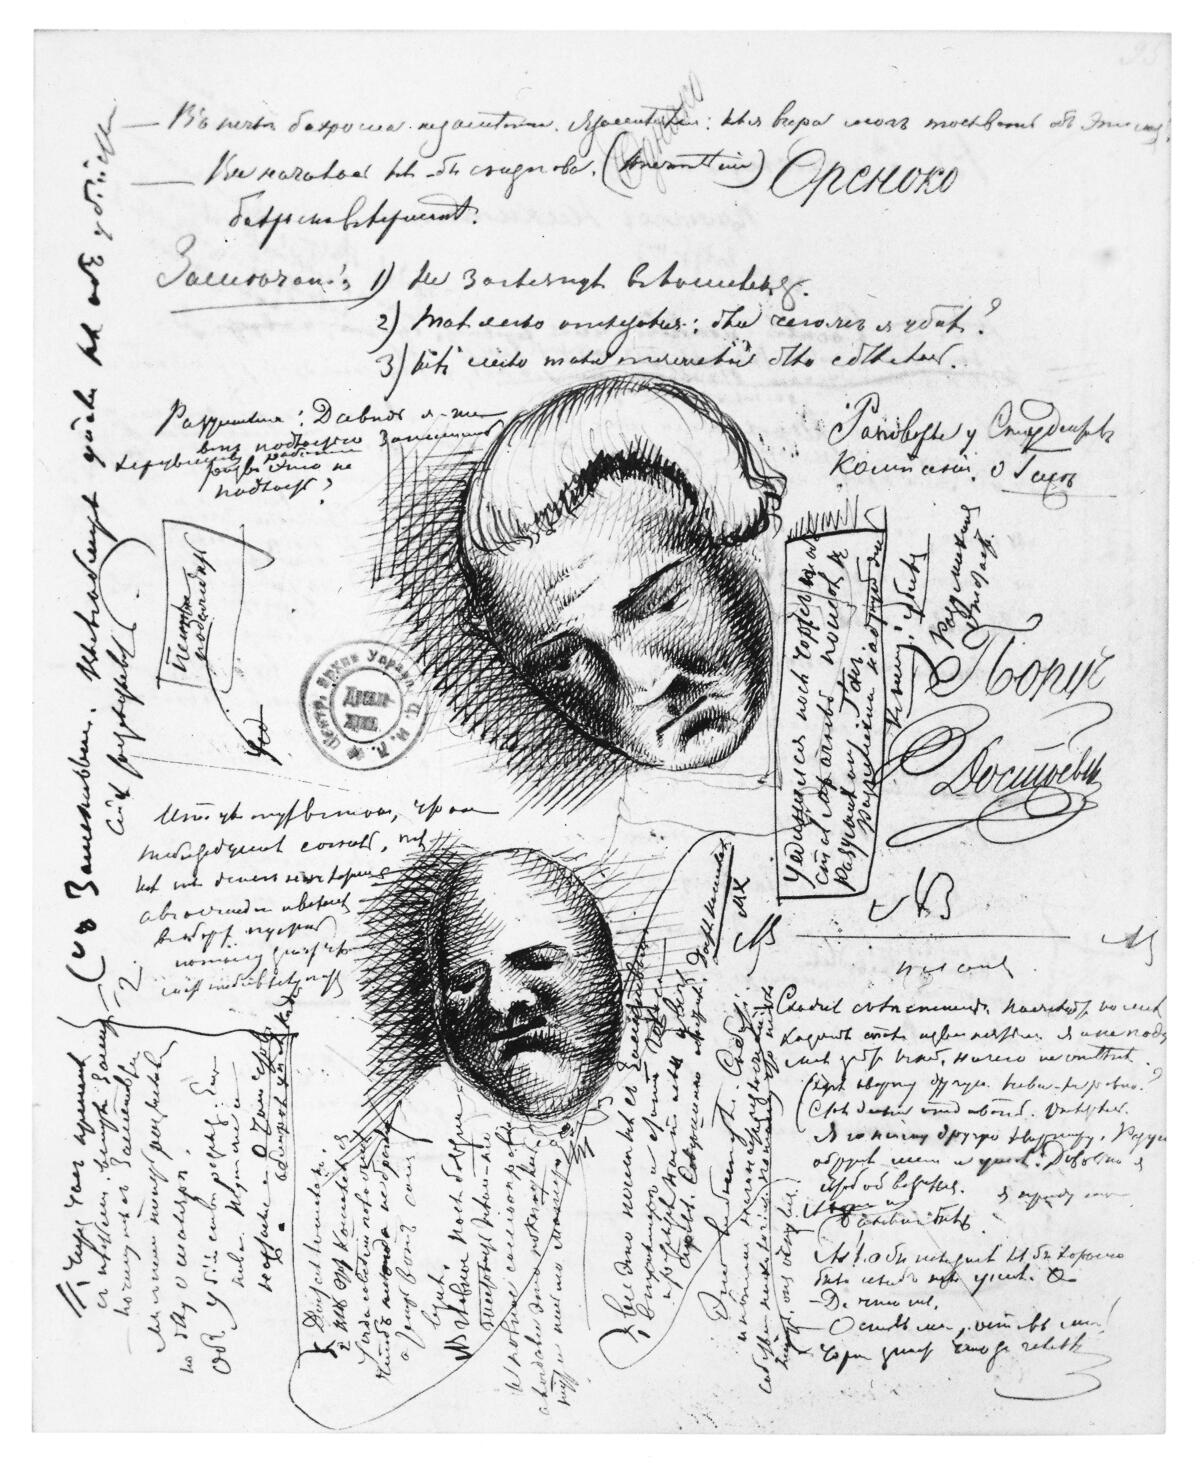 A page from one of Fyodor Dostoevsky's notebooks, with drawings of faces and writing.